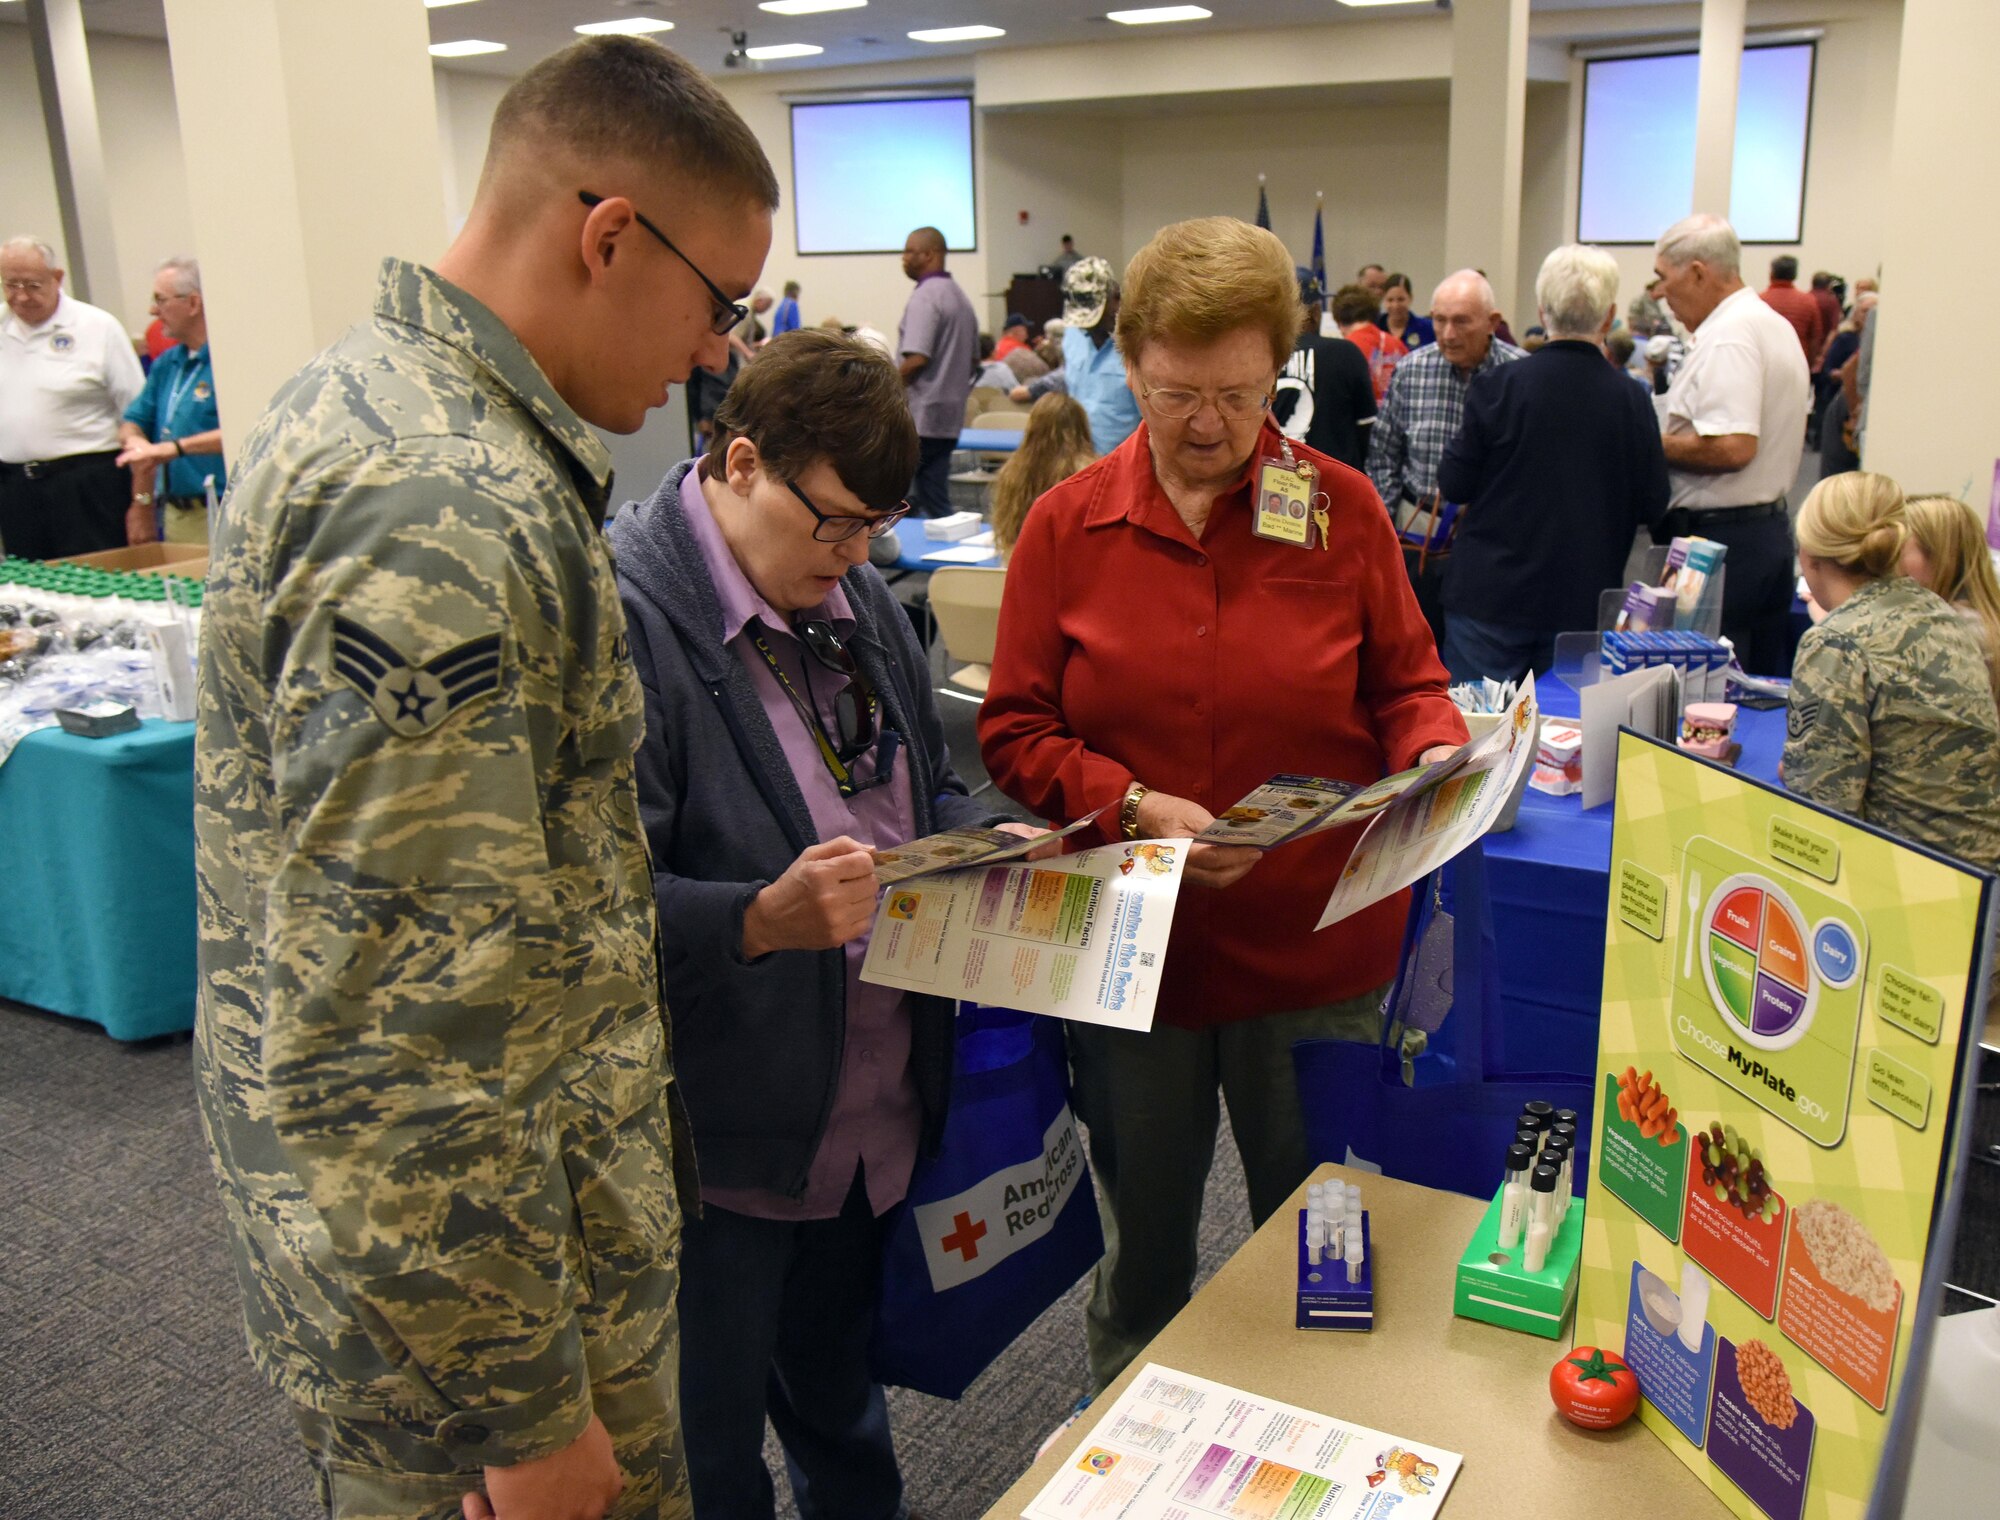 Senior Airman Juan Acevedo, 81st Diagnostic and Therapeutics Squadron diet therapy technician, provides informational pamphlets to U.S. Navy retired Senior Chief Petty Officer Faye Jefferson and U.S. Marine retired Sgt. Maj. Doris Denton during Retiree Appreciation Day at the Roberts Consolidated Aircraft Maintenance Facility Oct. 20, 2017, on Keesler Air Force Base, Mississippi. The annual event, sponsored by the Keesler Retiree Activities Office, included more than 20 displays with information pertinent to retirees and a free lunch. (U.S. Air Force photo by Kemberly Groue)